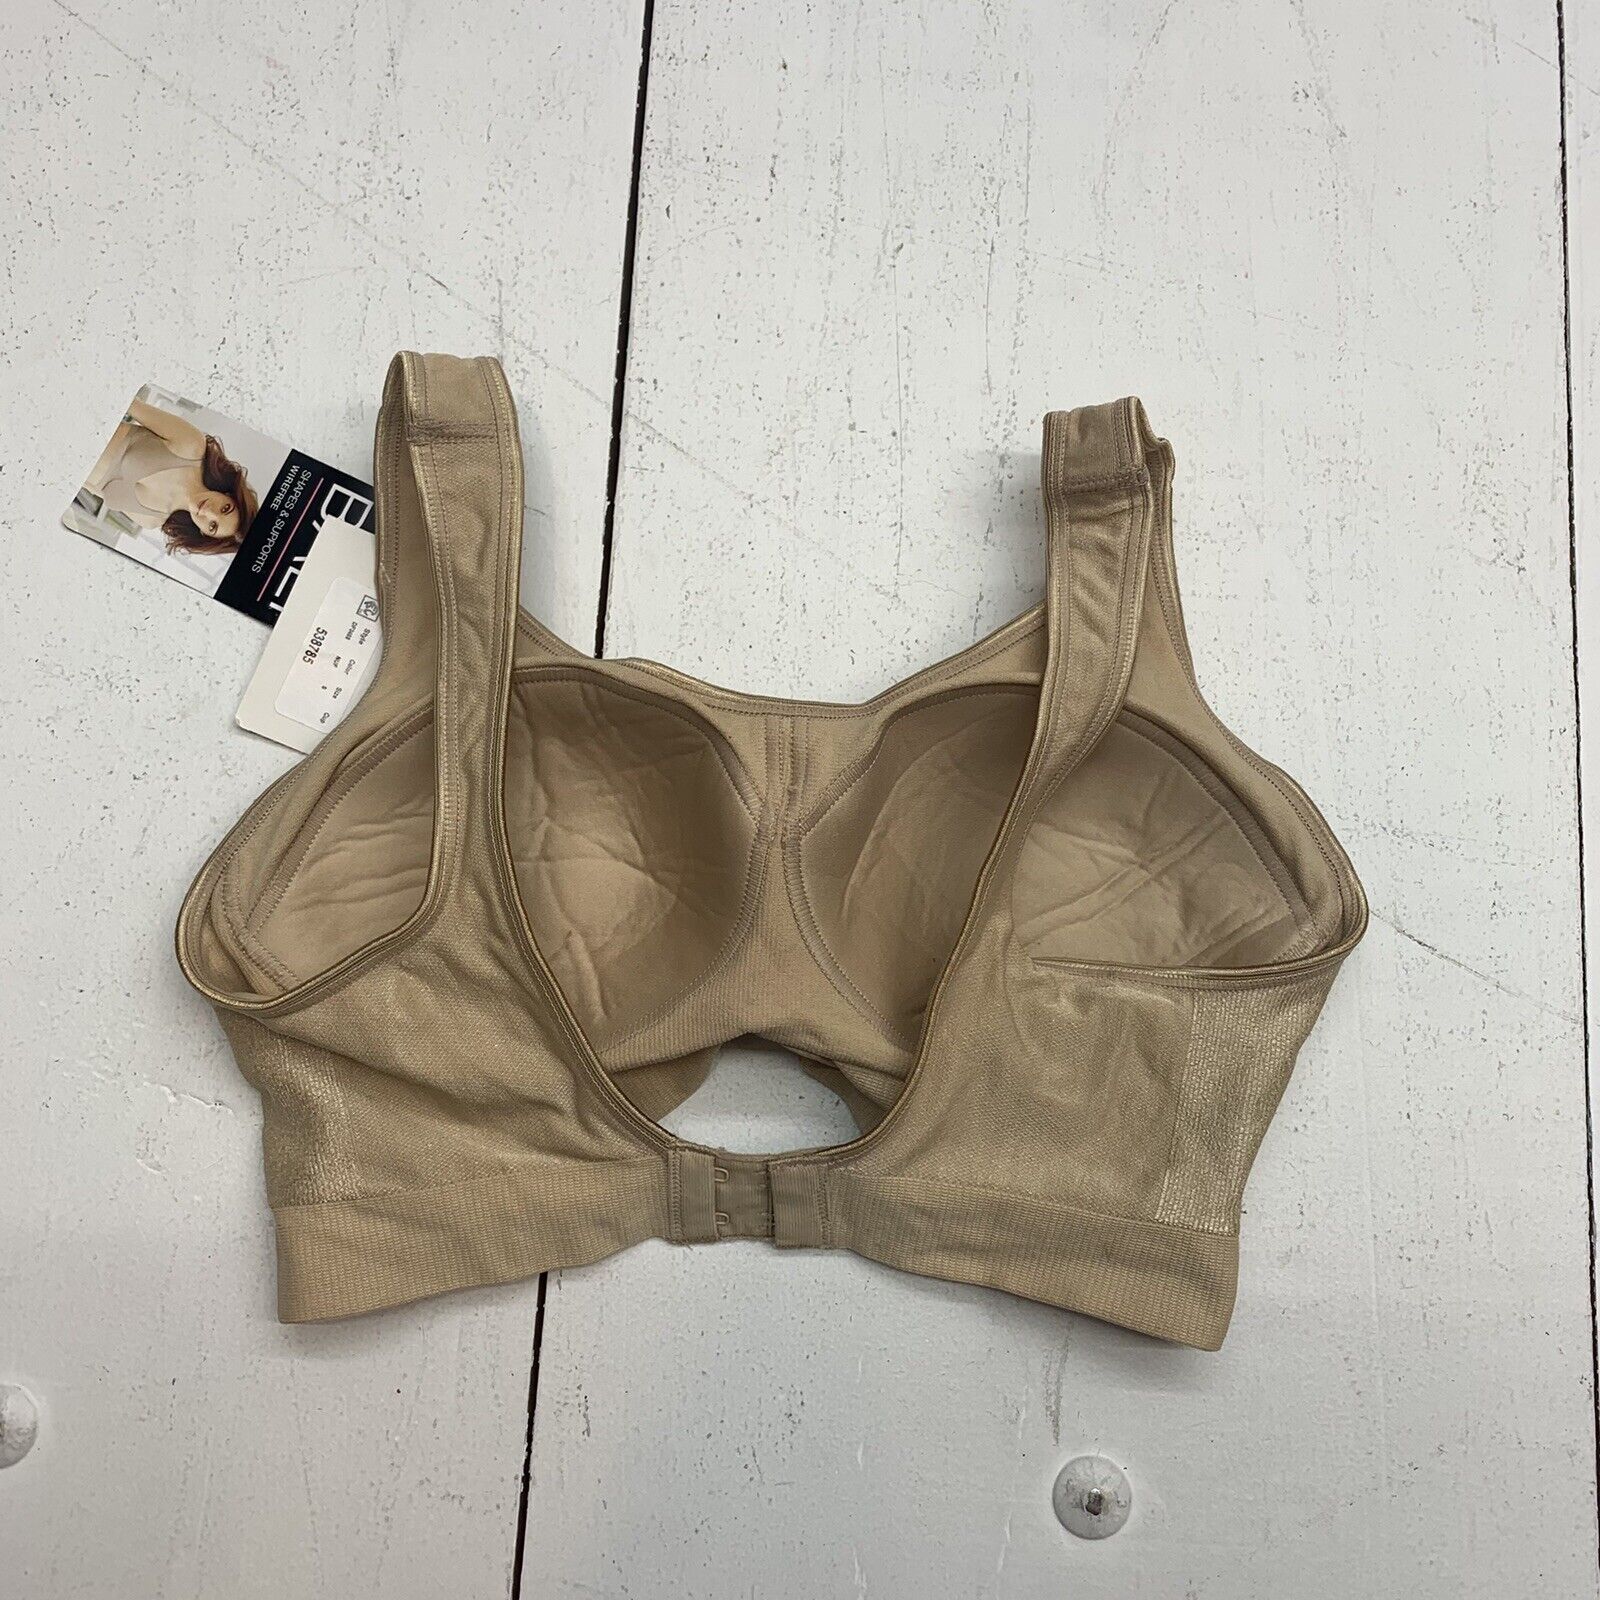 Bali Shapes & Support Wirefree Beige Bra Size Small